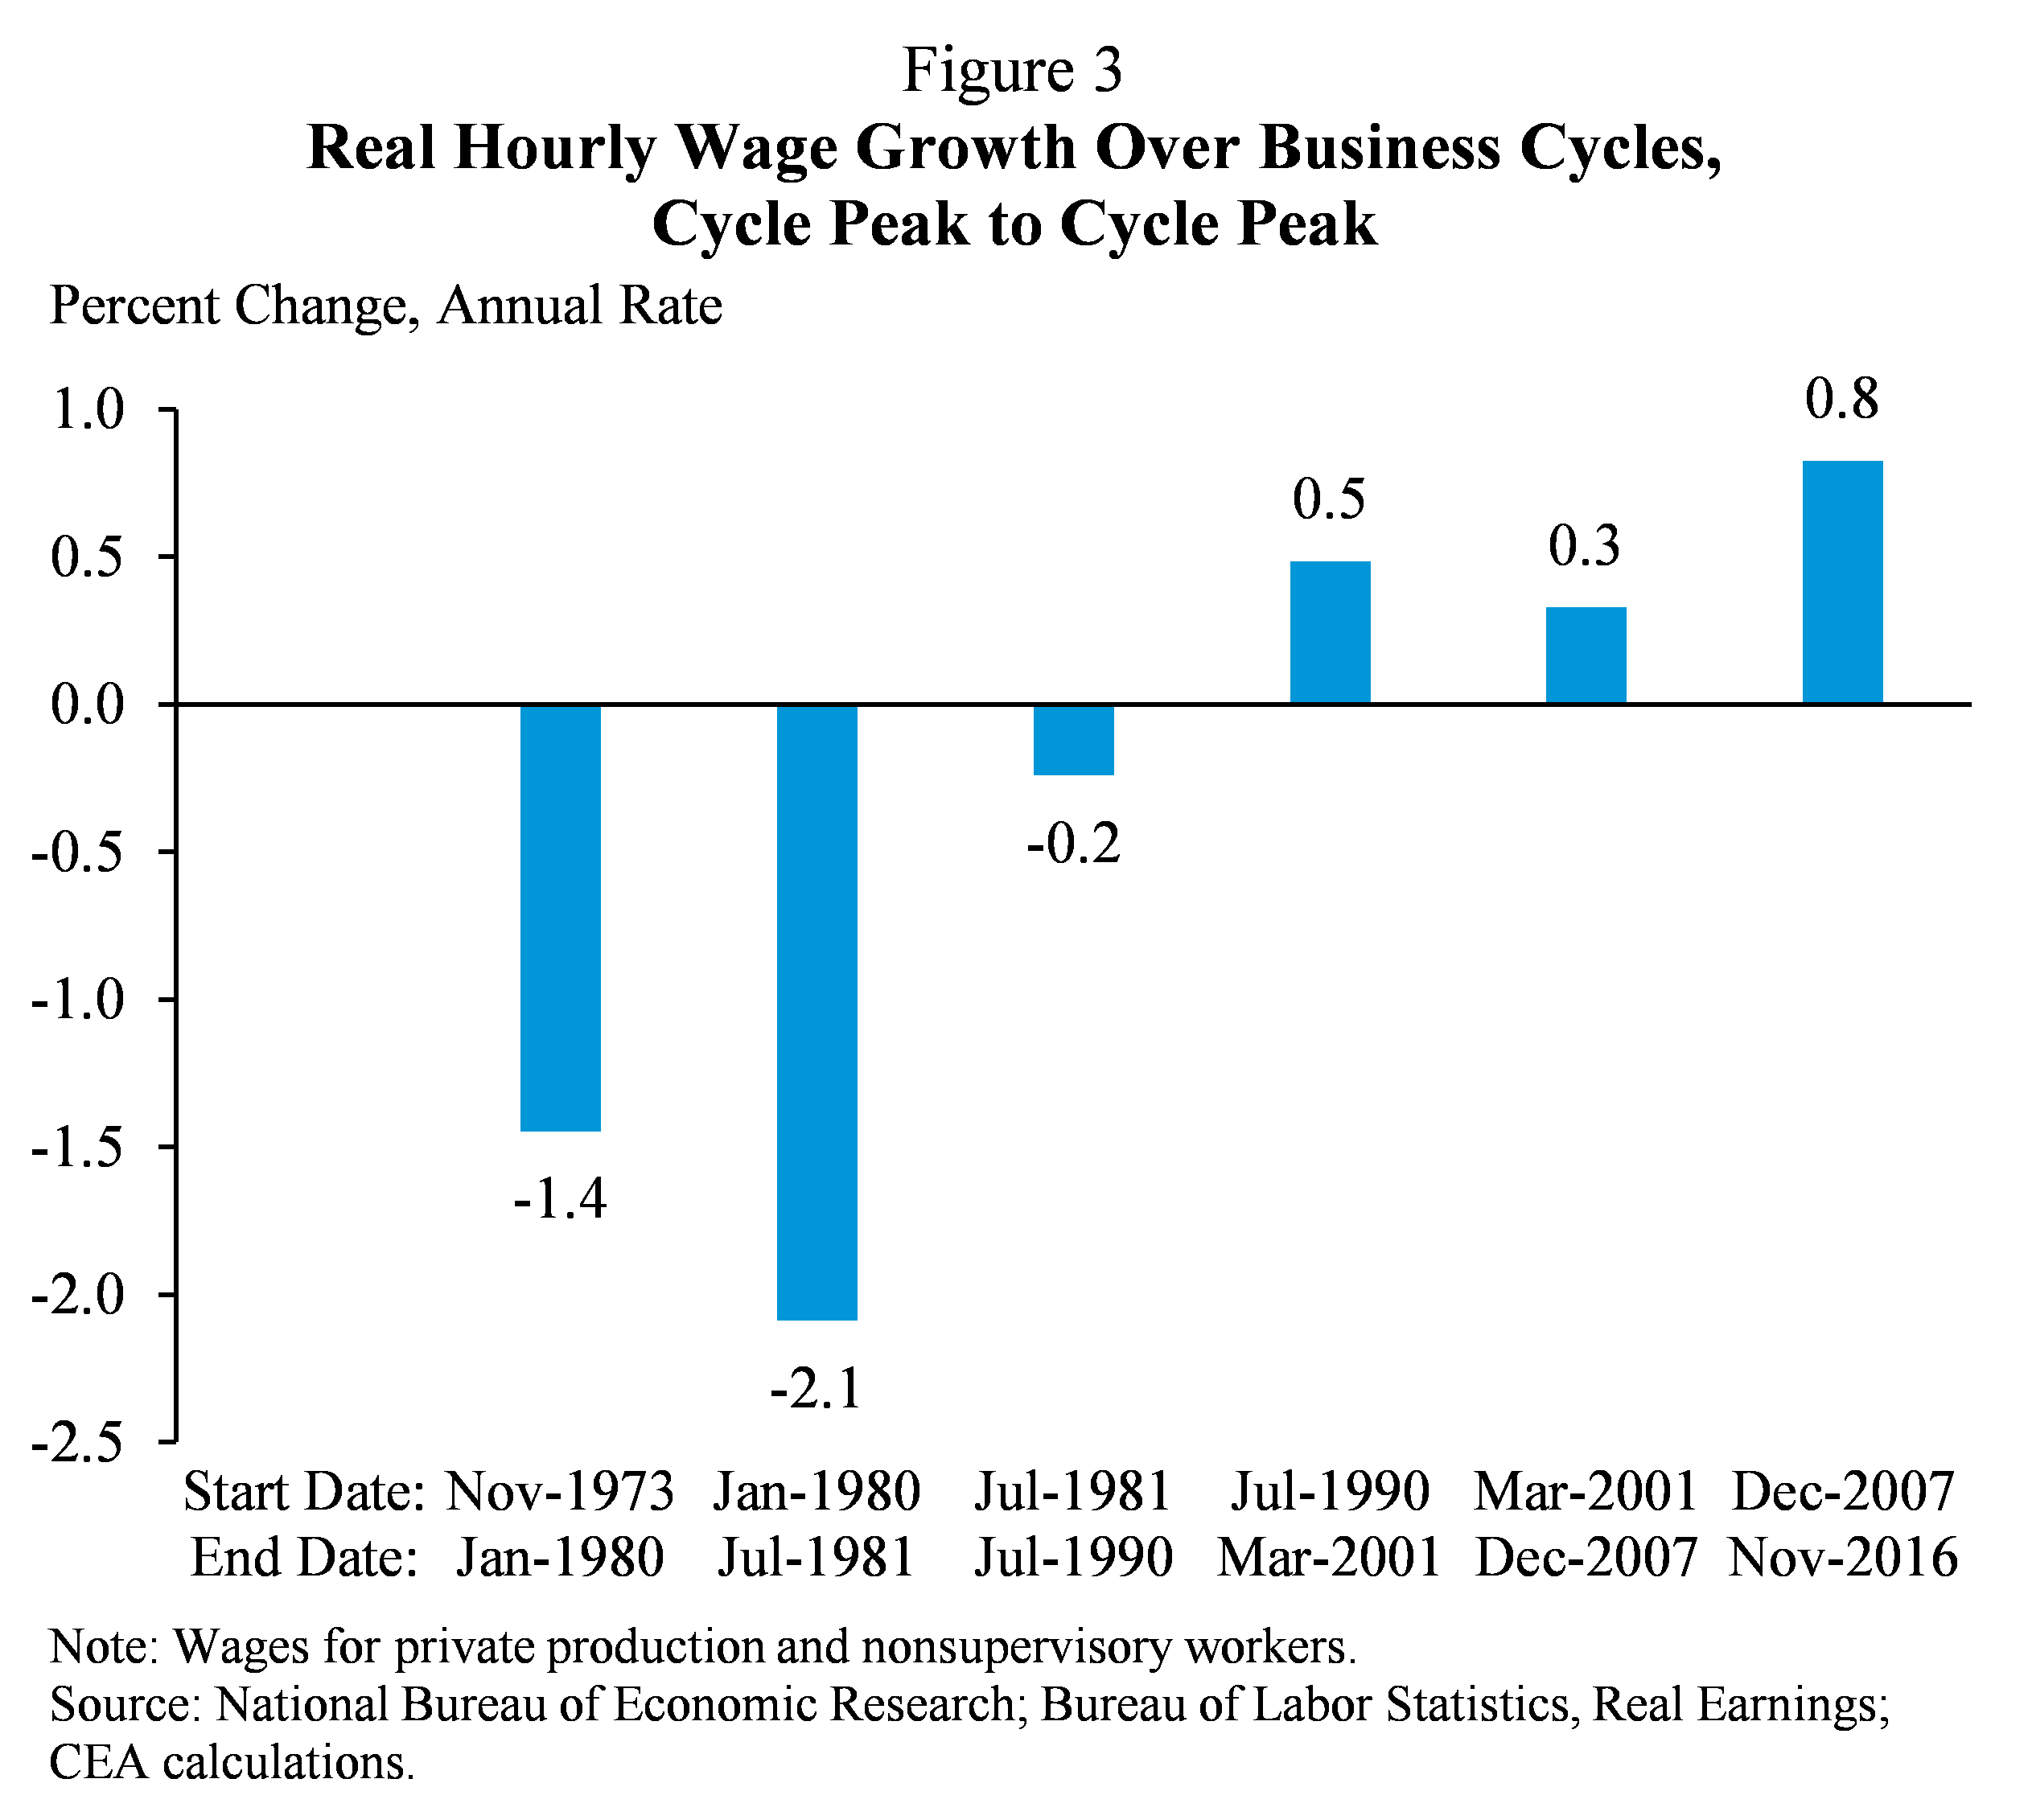 Figure 3. Real Hourly Wage Growth Over Business Cycles, Cycle Peak to Cycle Peak